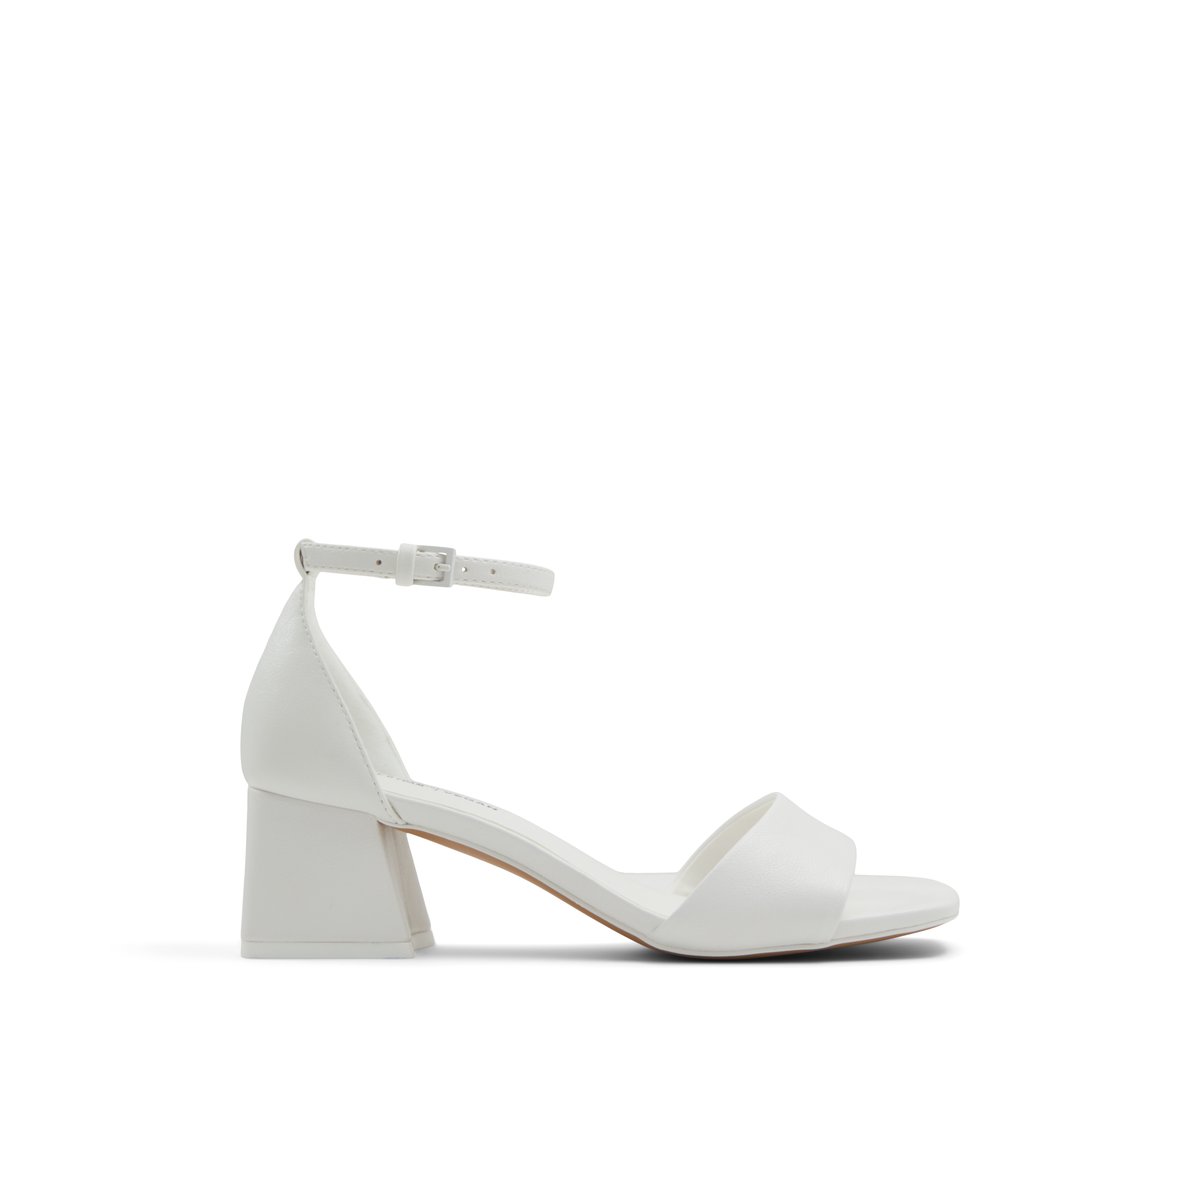 Vickii White Women's Low-mid Heels | Call It Spring Canada